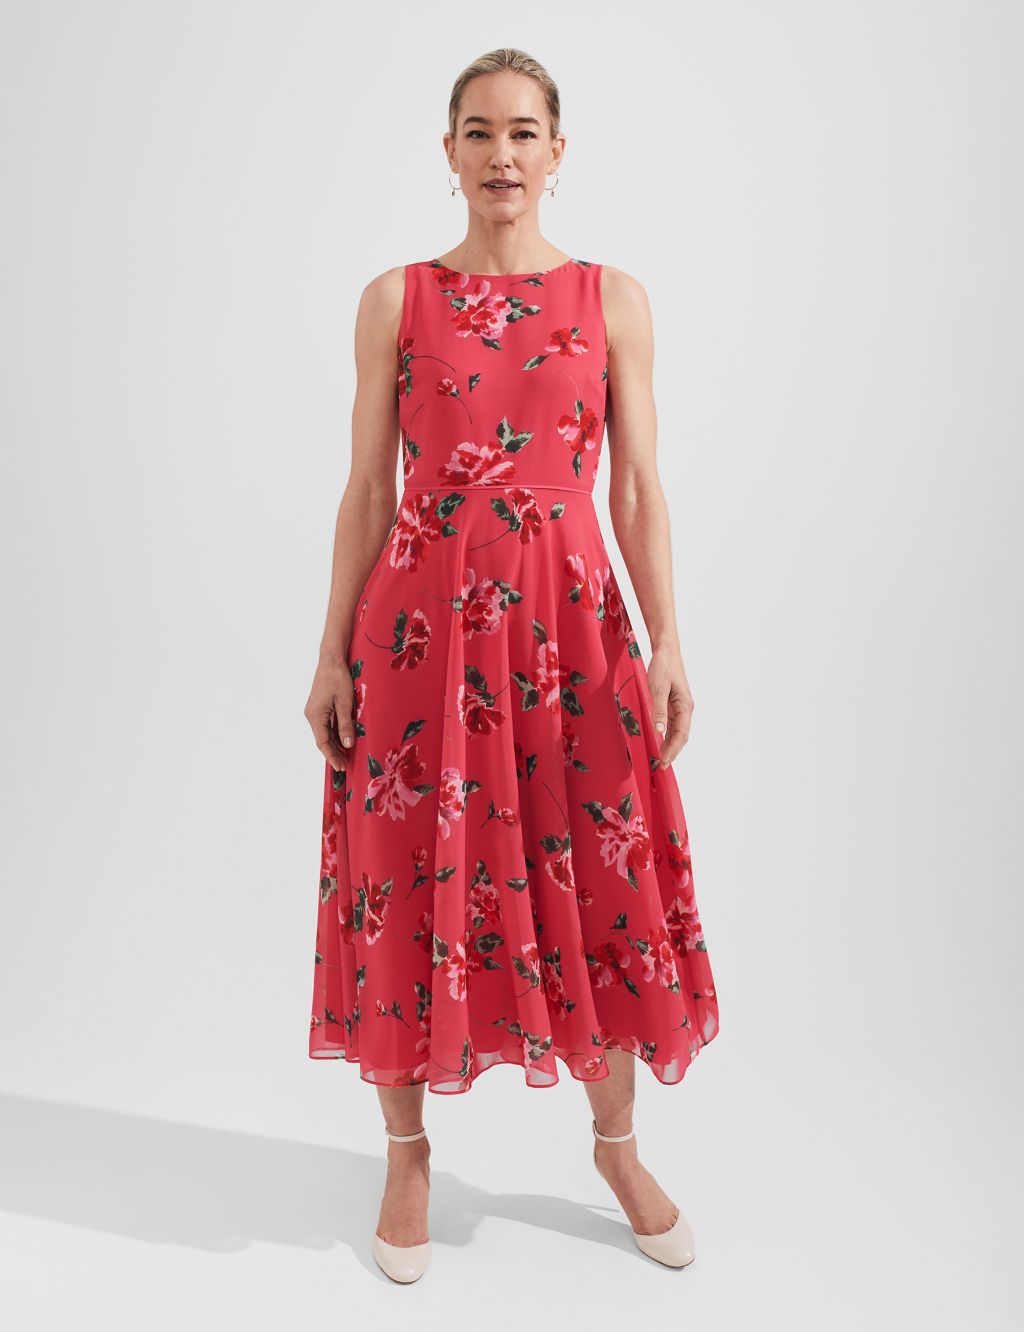 Floral Midaxi Swing Dress image 1